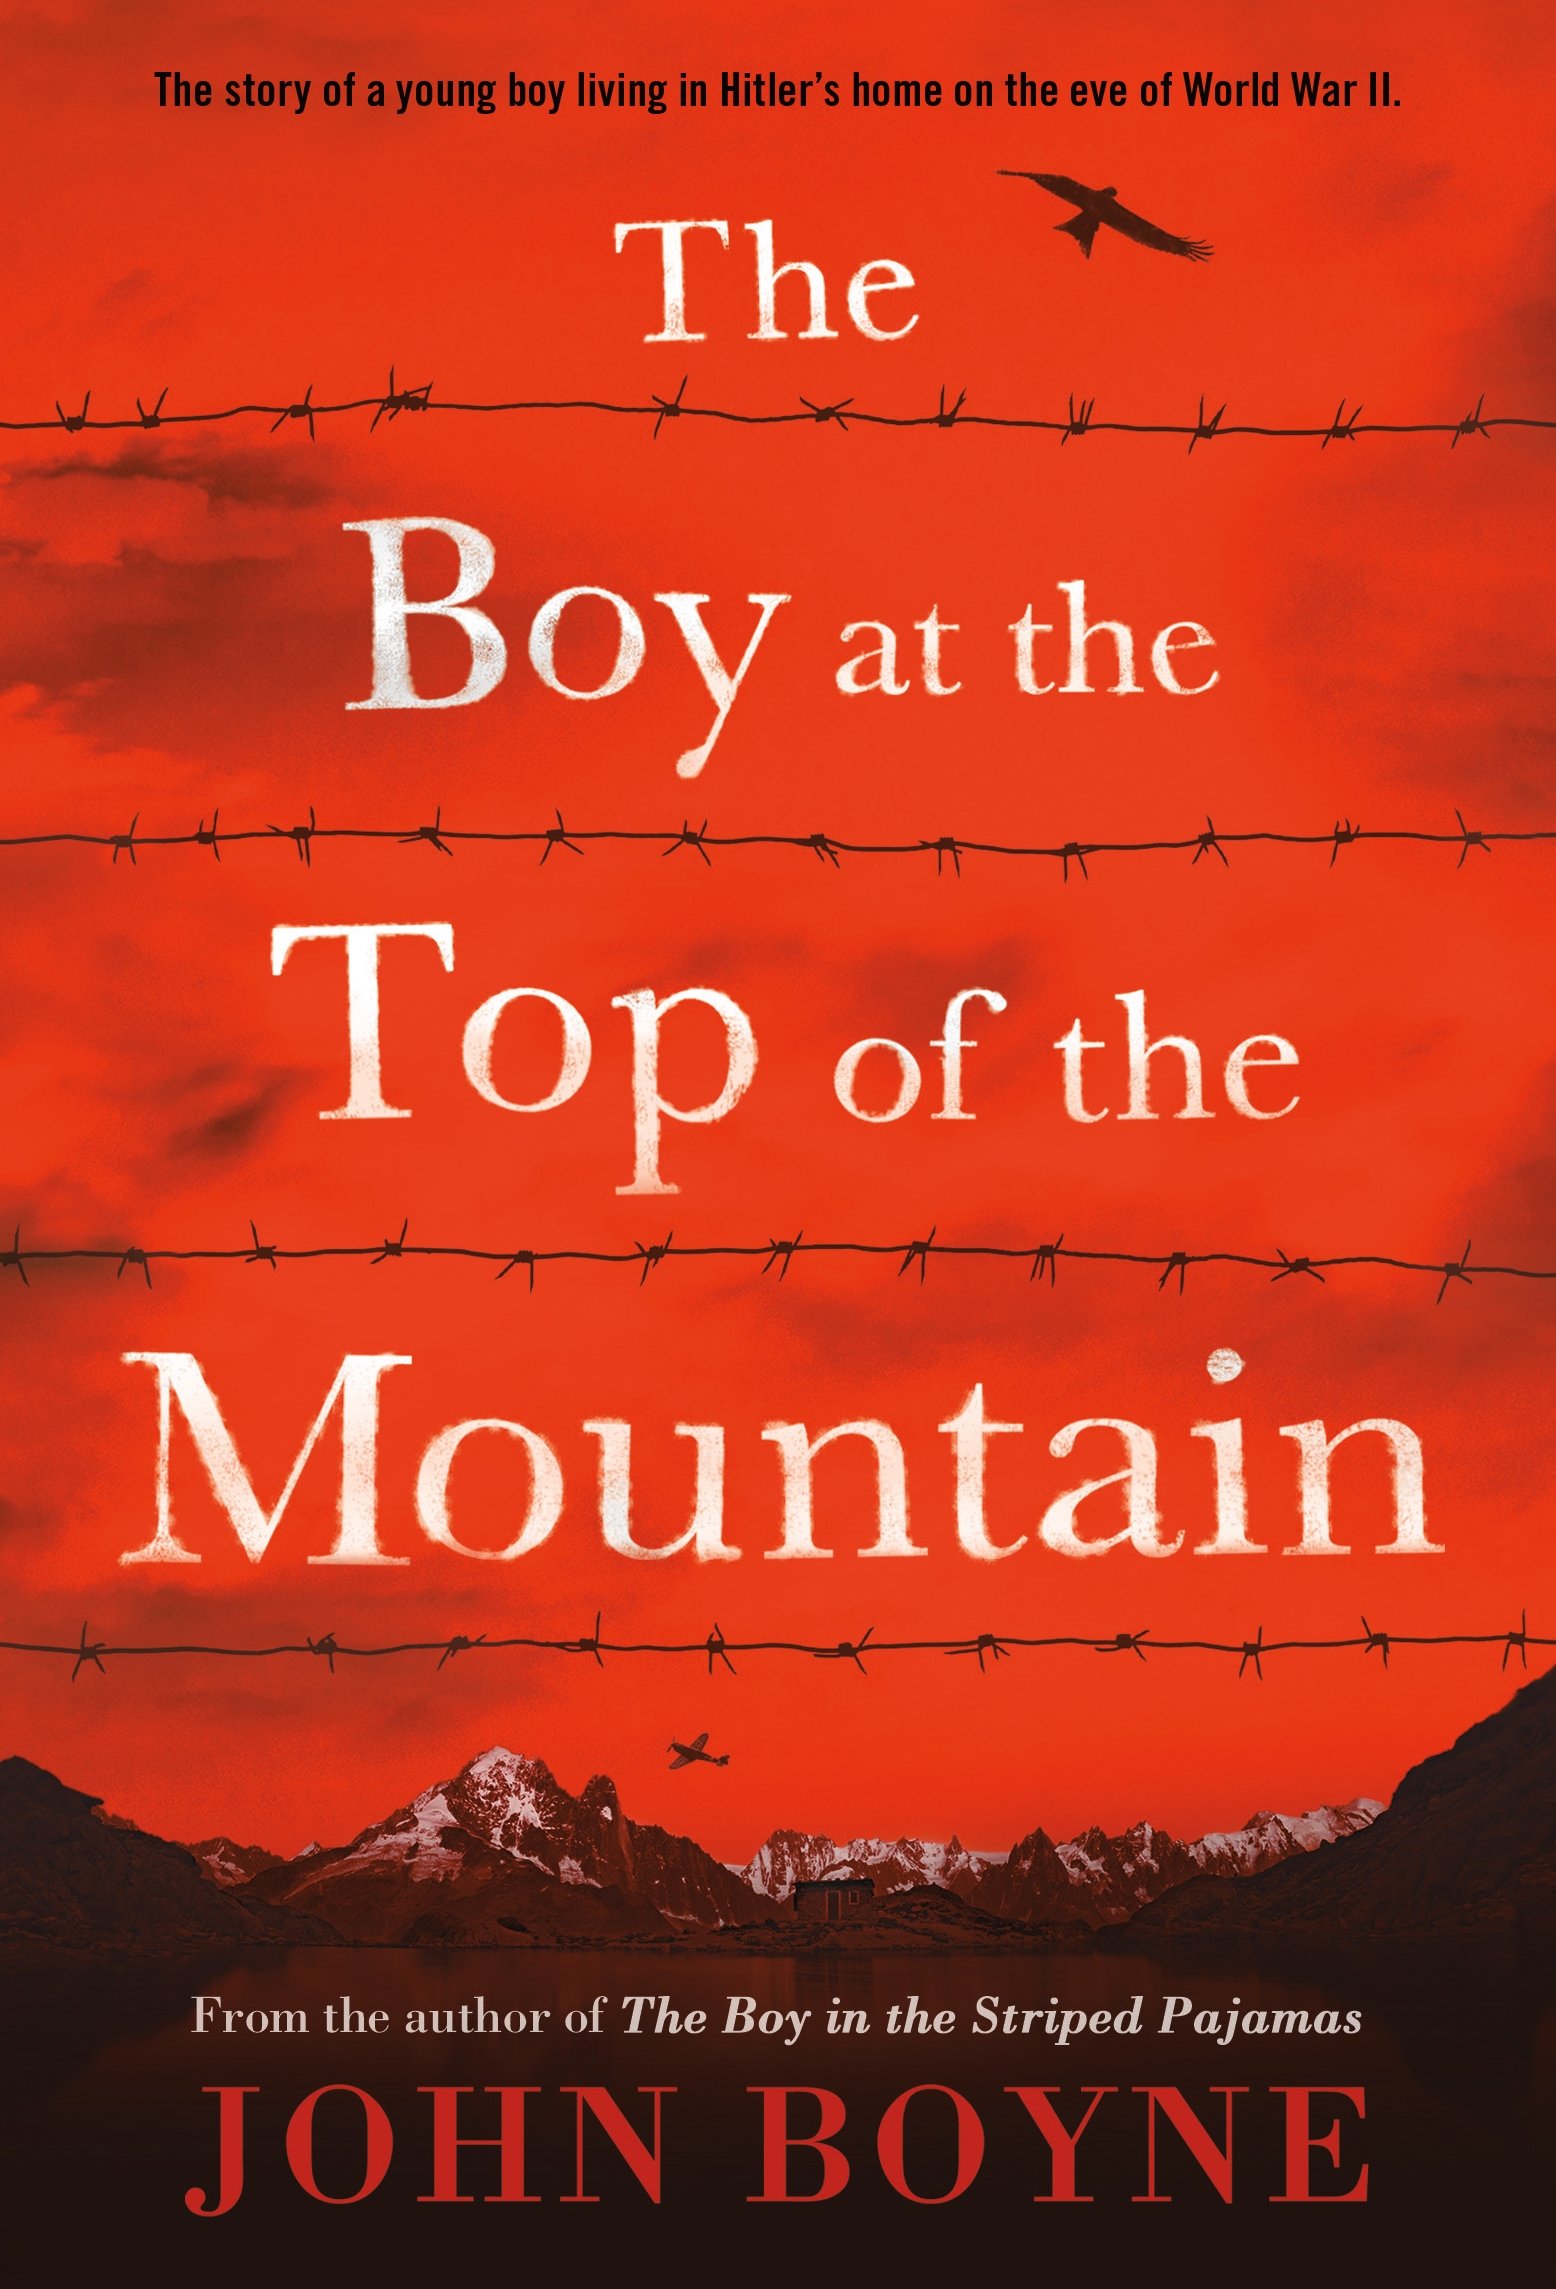 The Boy at the Top of the Mountain by John Boyne.jpg